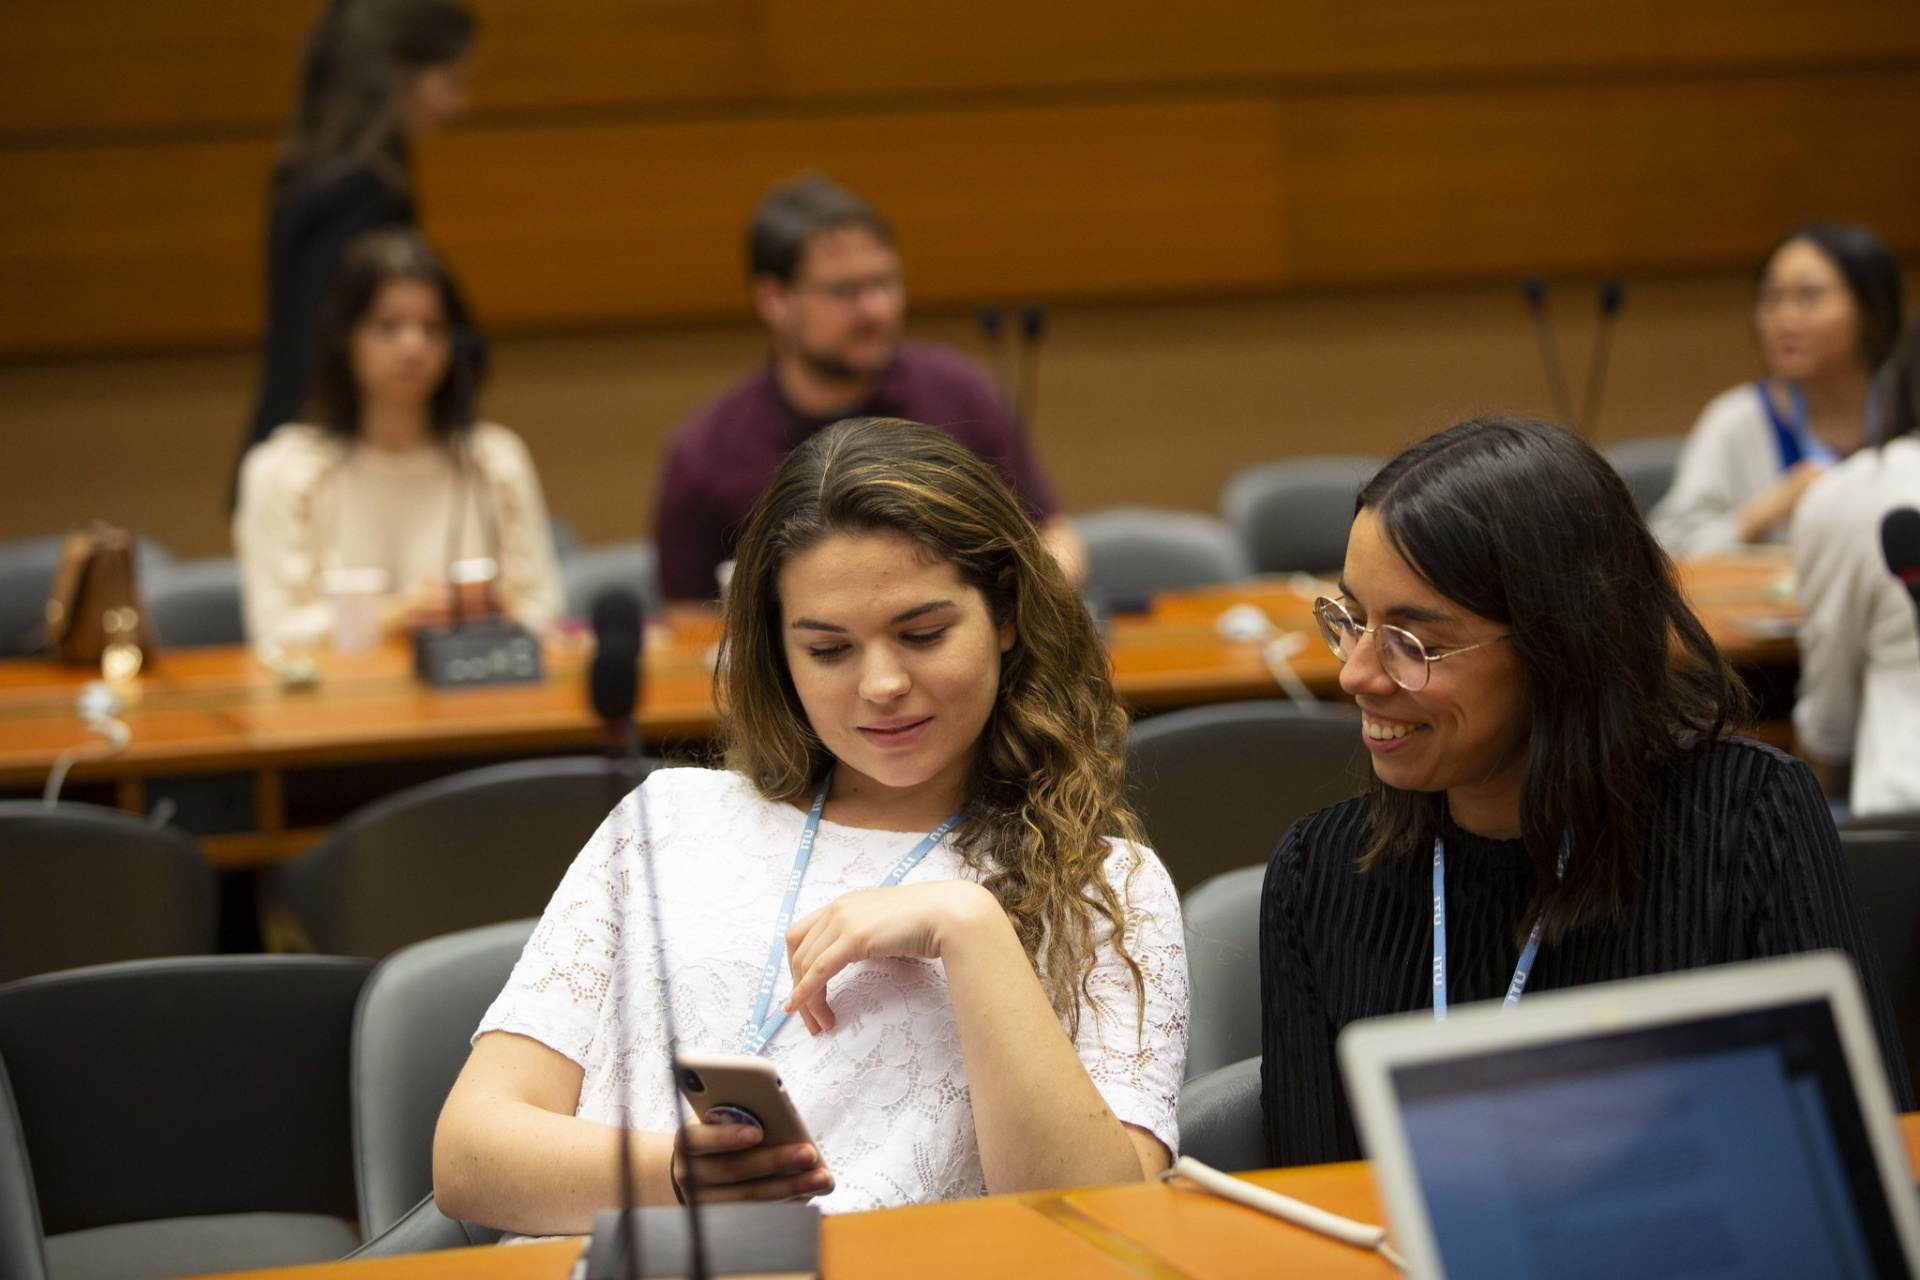 Two young women sitting inside a UN conference room, smiling at something they see on a mobile phone